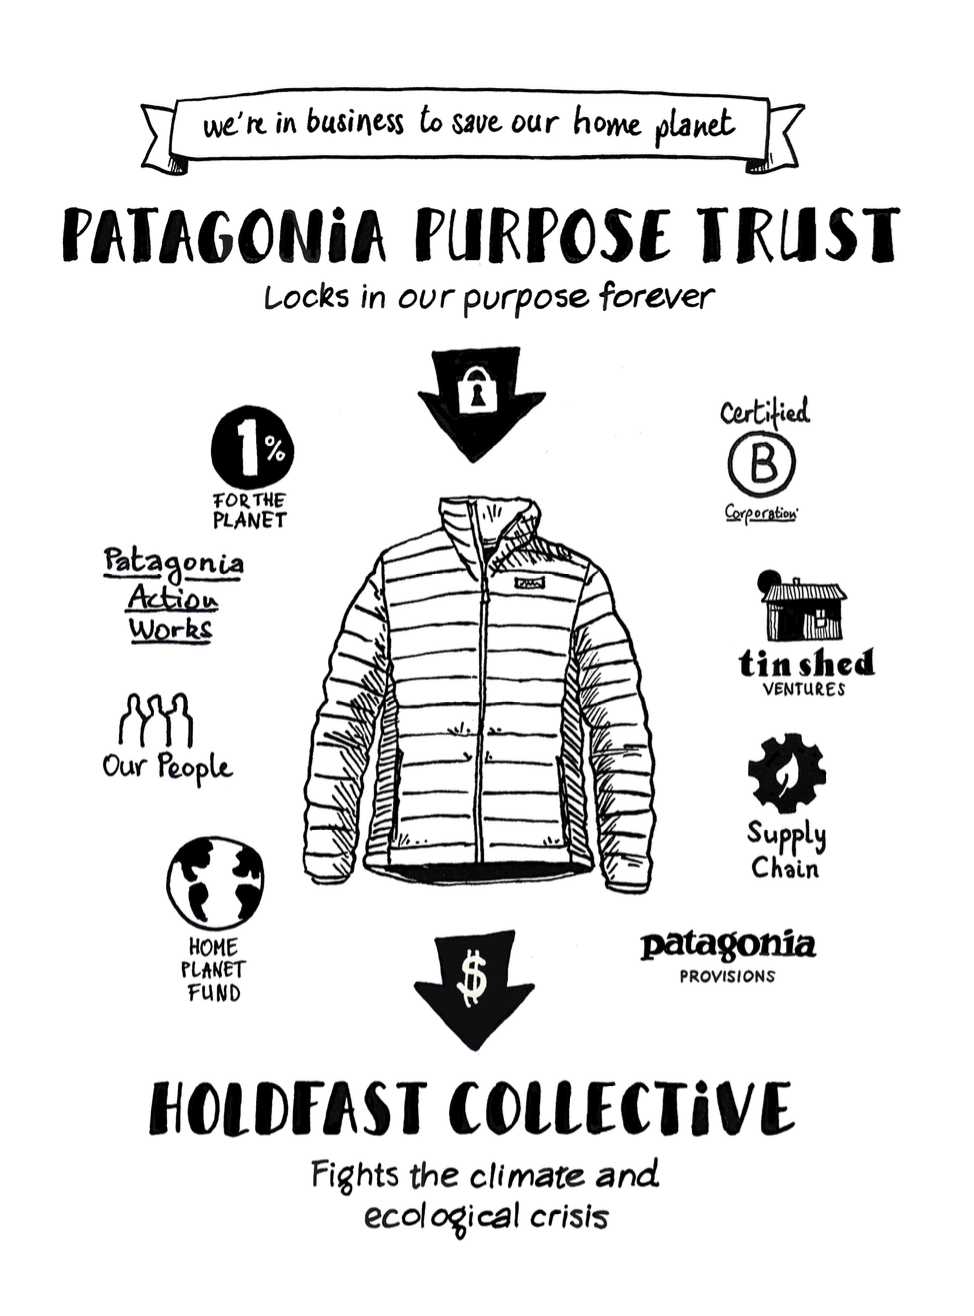 A diagram illustrating Patagonia’s new ownership structure, which will funnel profits into fighting the climate crisis